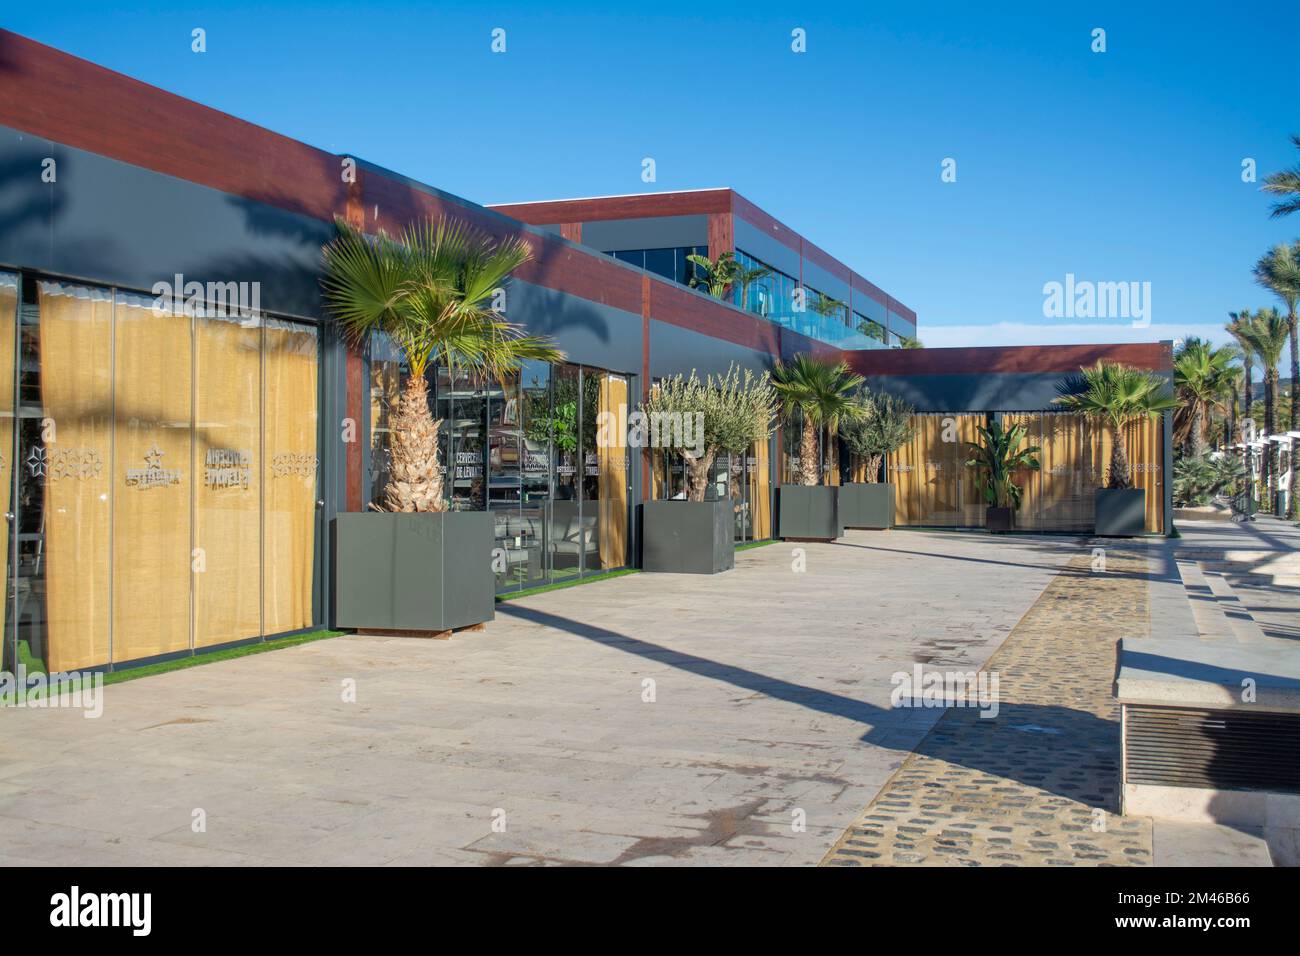 Exterior of the new Alviento bar restaurant on the quayside of the port of Cartagena in Murcia, Spain Stock Photo